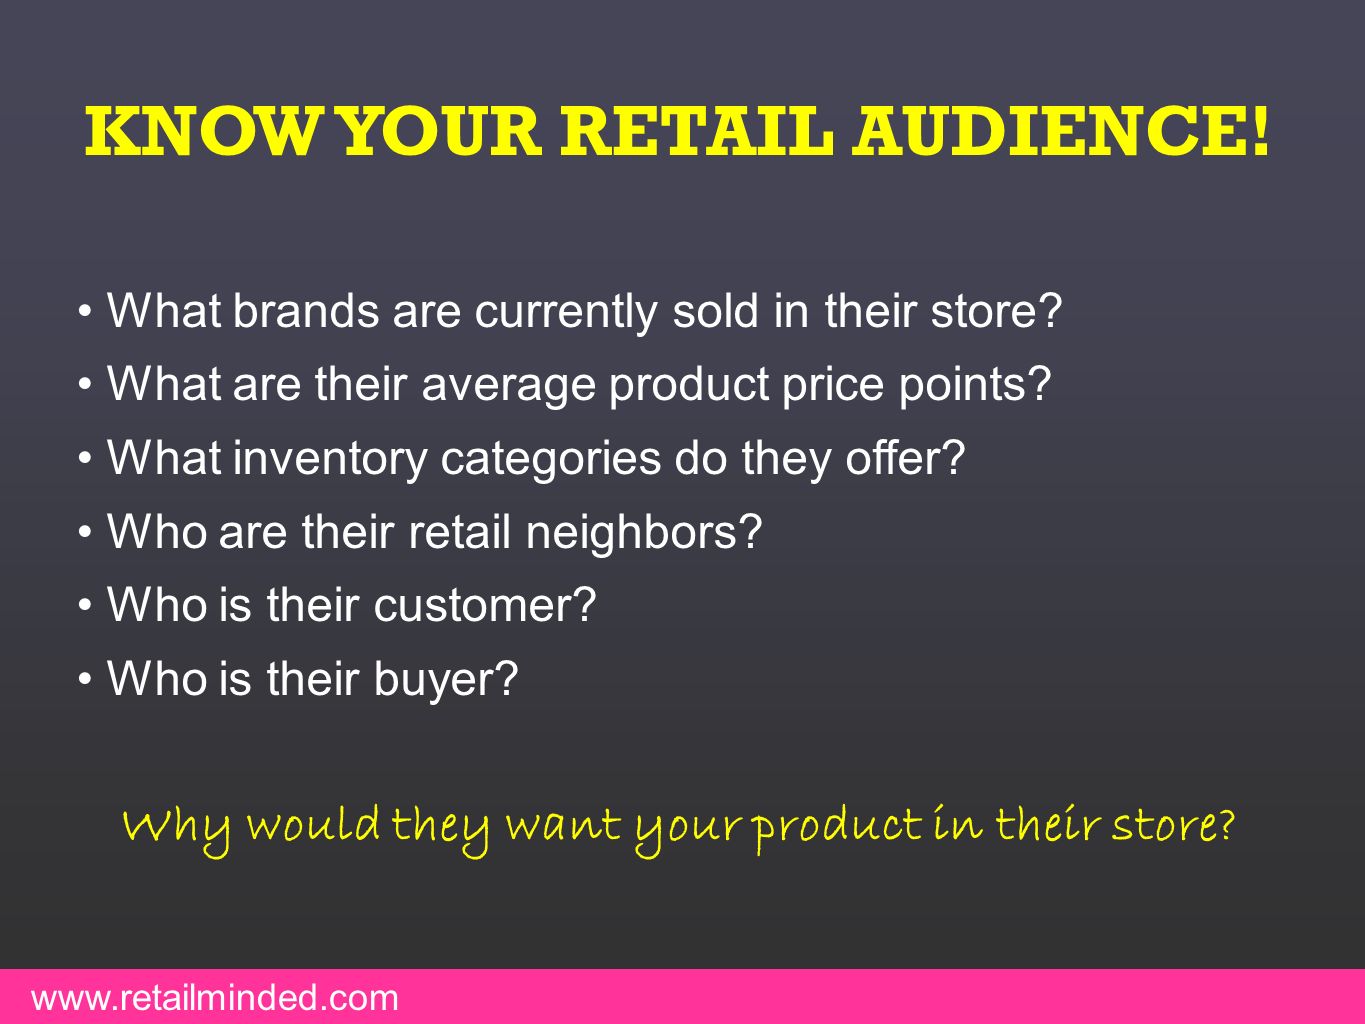 KNOW YOUR RETAIL AUDIENCE!